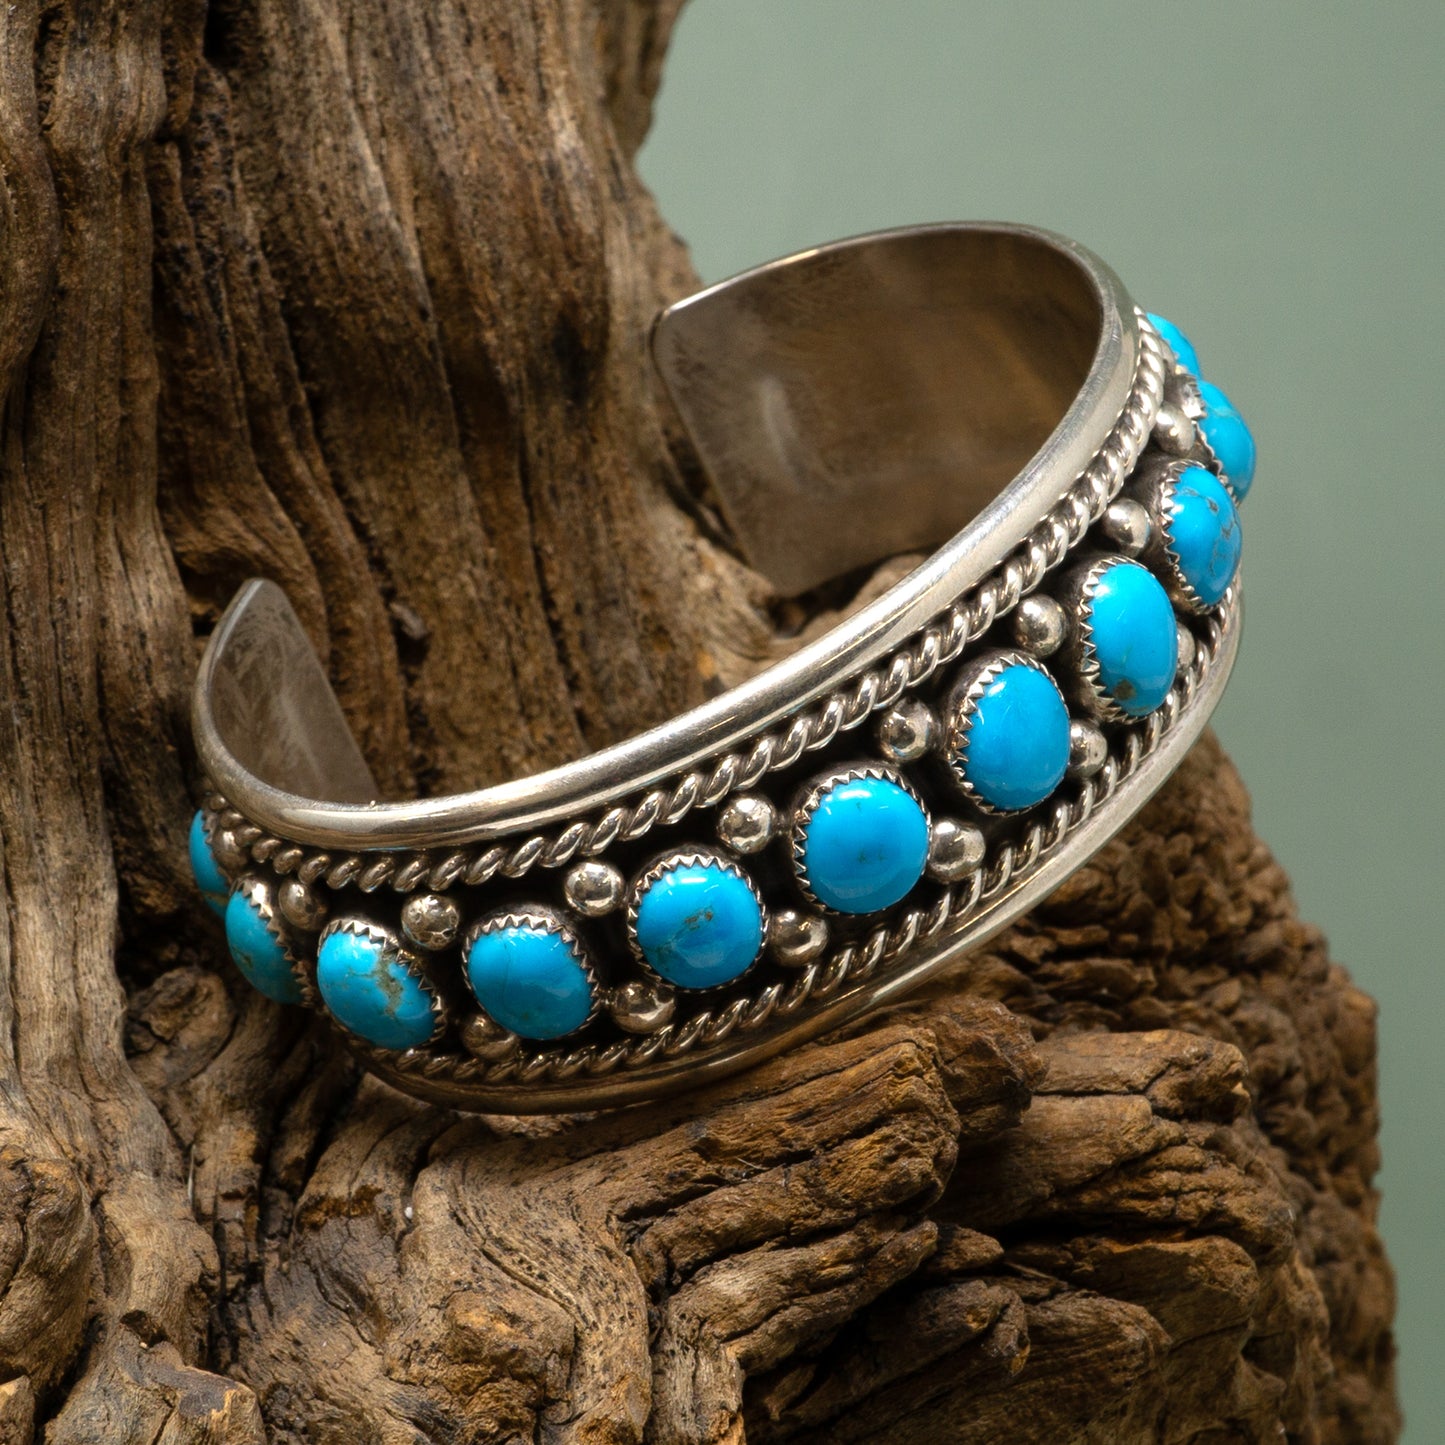 Turquoise & Silver Cuff Bracelet by Chris Charley